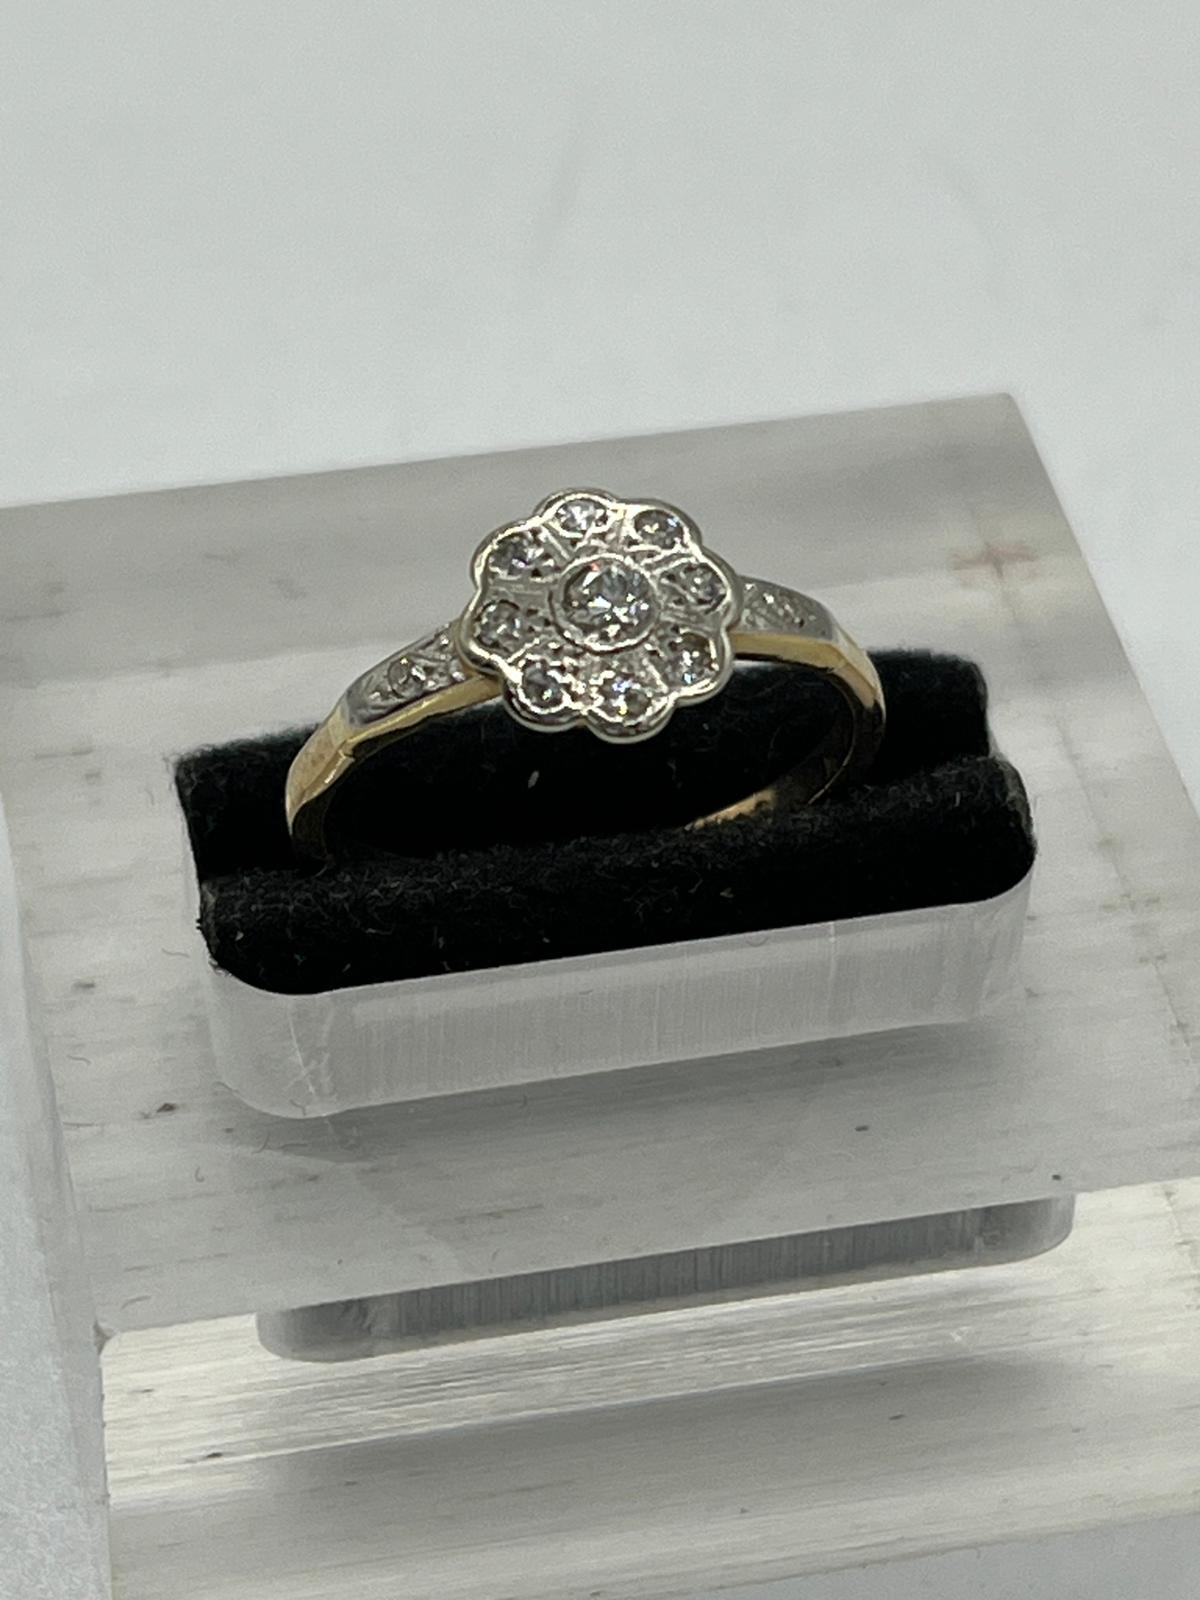 A 9ct gold antique daisy ring, approximate size O